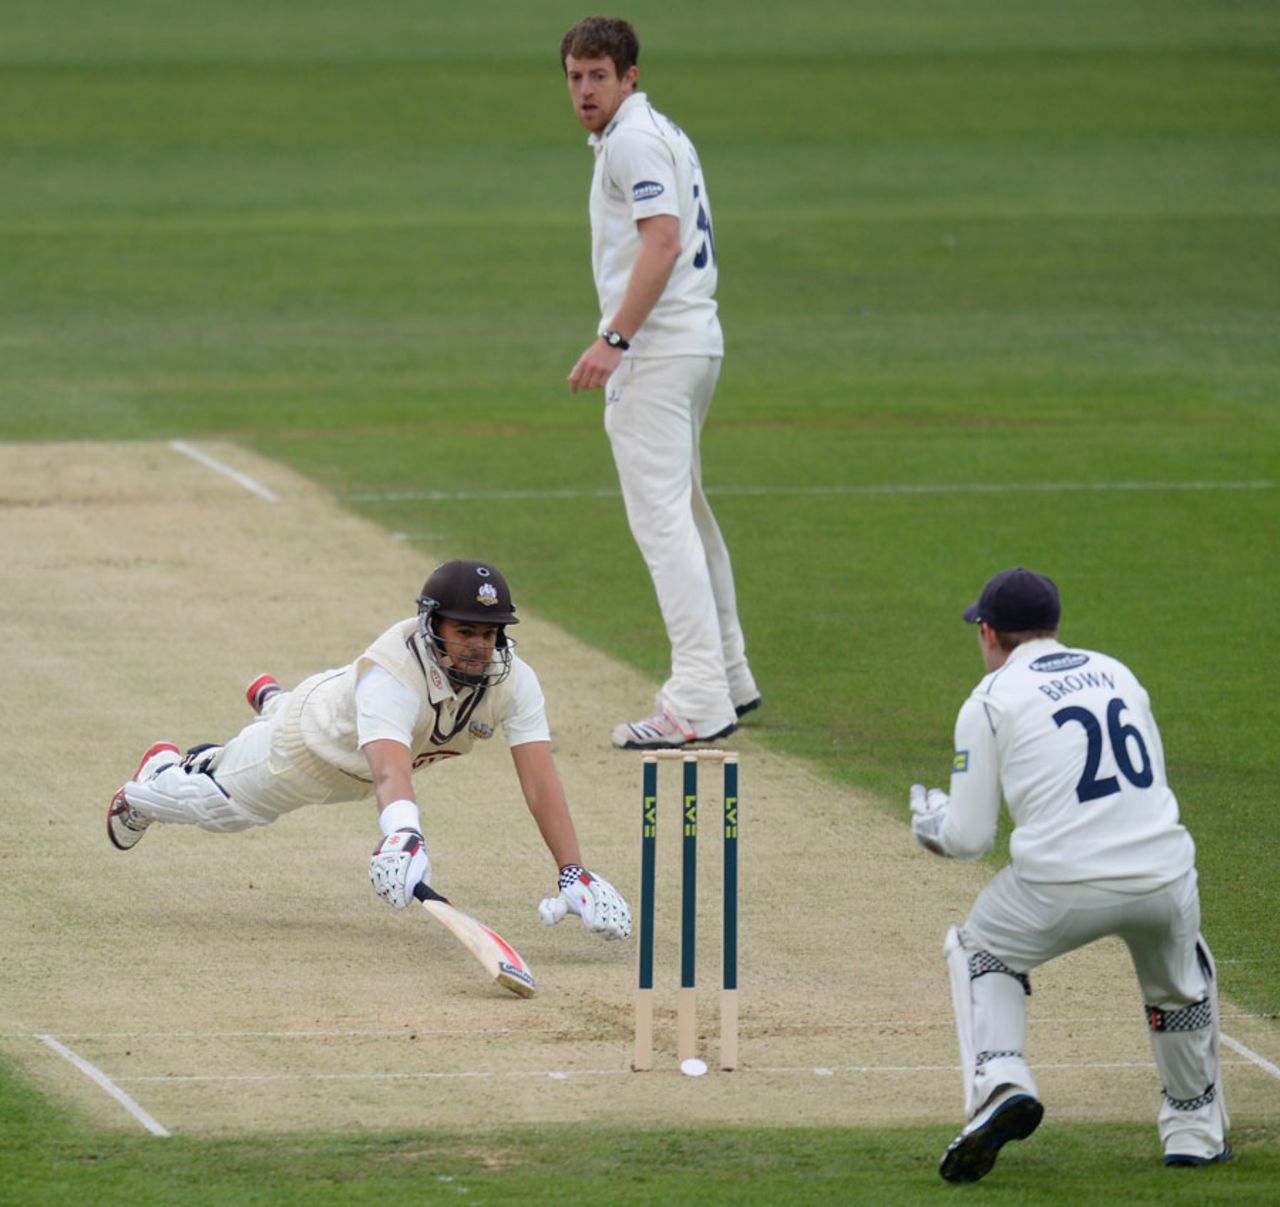 Jacques Rudolph dives to make his ground, Surrey v Sussex, County Championship, London, The Oval, 1st day, April 5, 2012